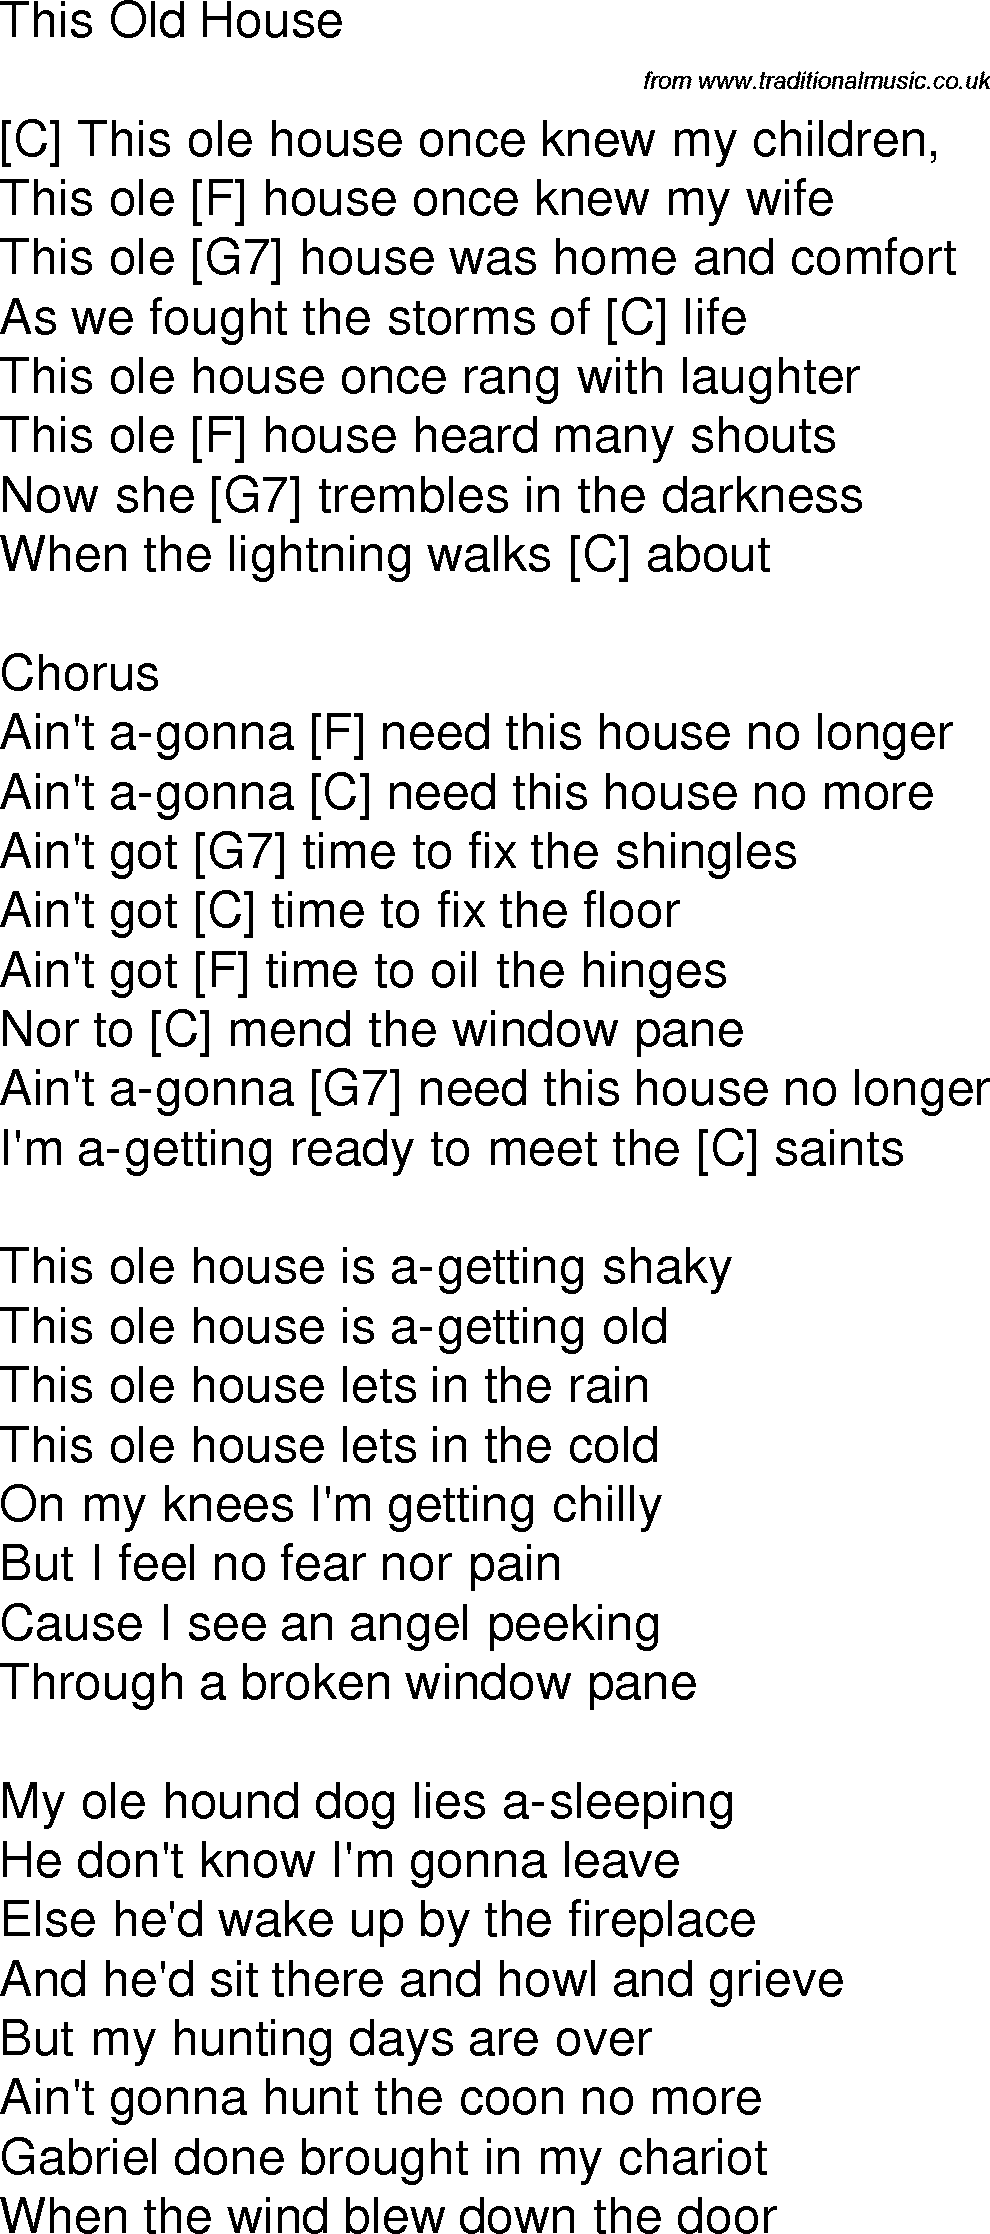 Old time song lyrics with chords for This Old House C